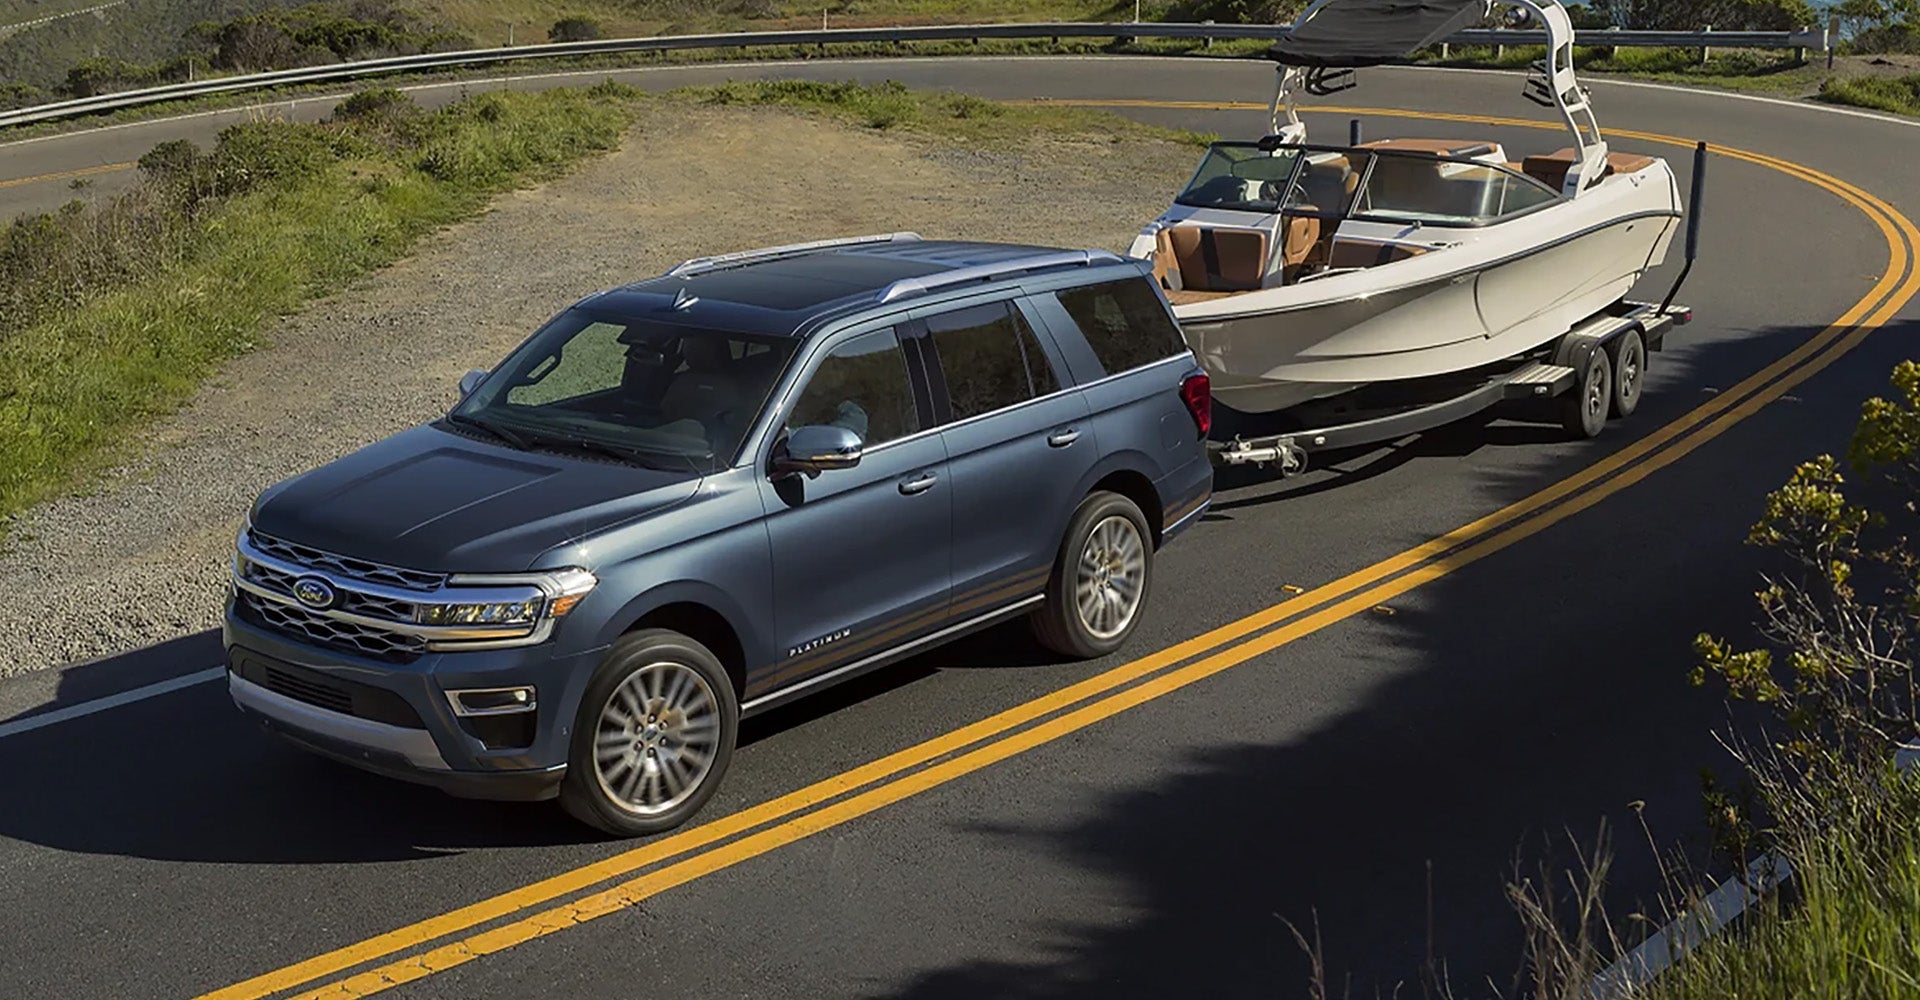 2022 Ford Expedition Towing Capacity